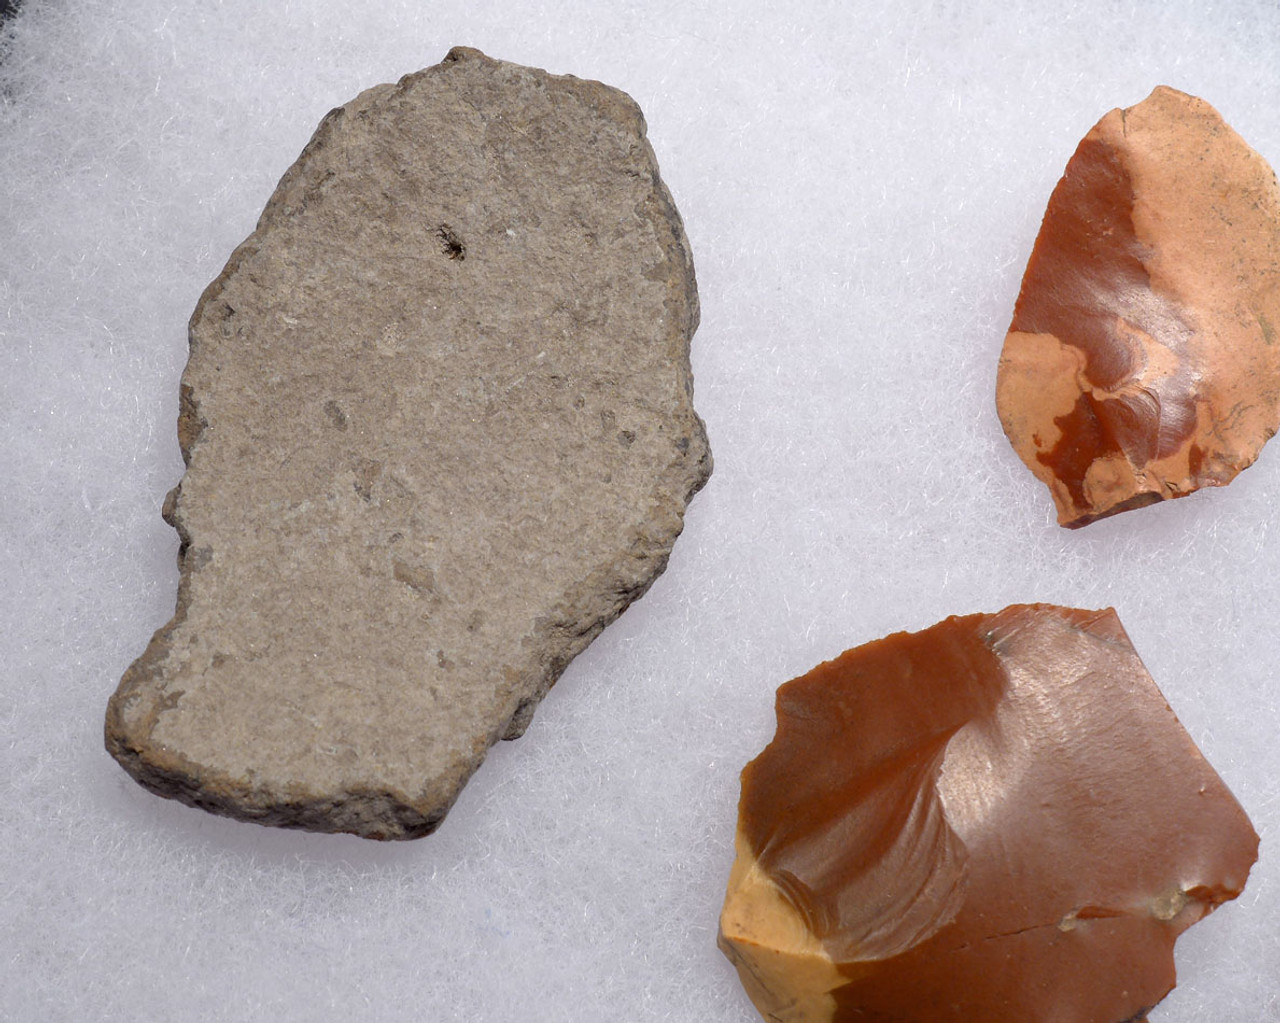 RARE HUNGARIAN NEOLITHIC FLAKE TOOL SET OF RED RADIOLARITE FROM EUROPE'S FIRST FARMERS  *N190